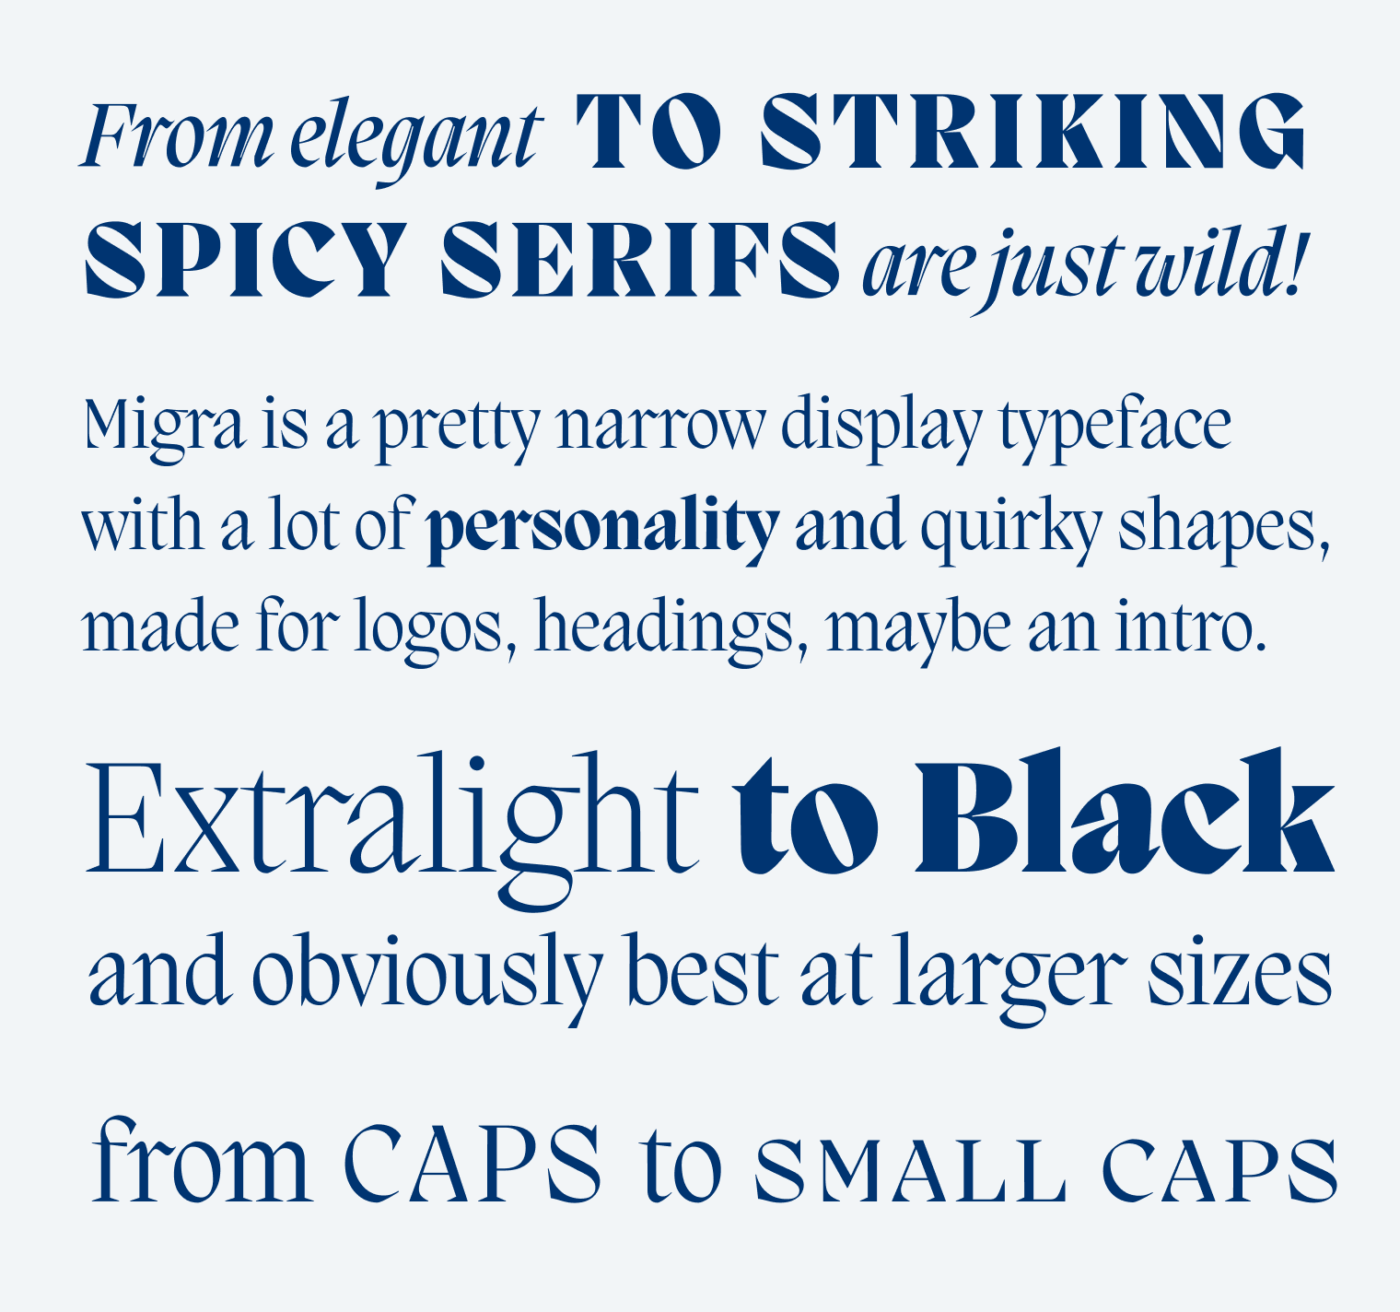 From elegant to striking, spicy Serifs are just wild! PP Migra is a pretty narrow display typeface with a lot of personality and quirky shapes, made for logos, headings, maybe an intro. Extralight to Black and obviously best at larger sizes. From Caps to Small Caps